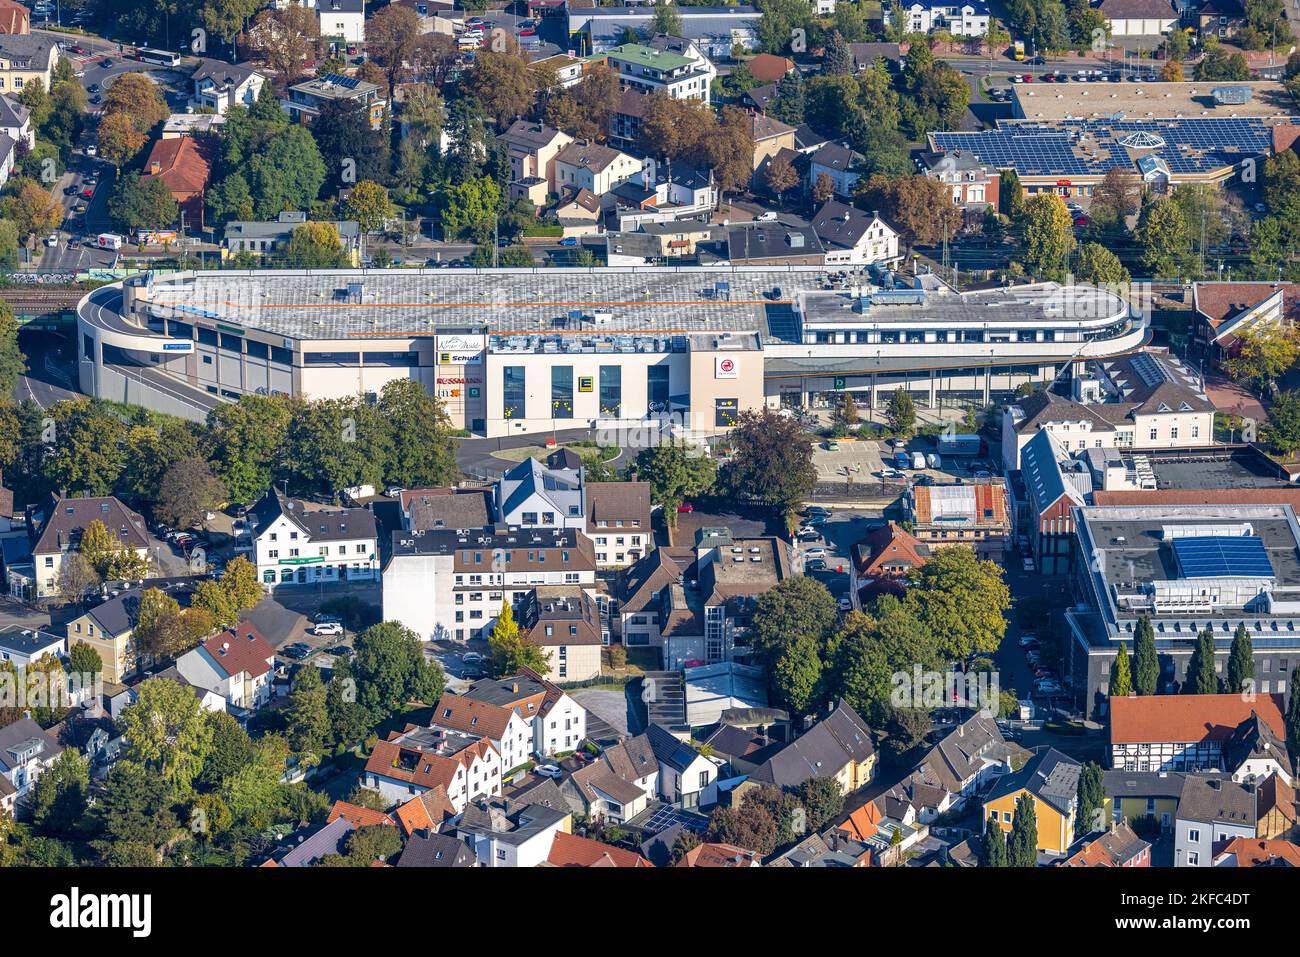 Aerial view, new building shopping center Neue Mühle, former site Mühle Bremme, Unna, Ruhr area, North Rhine-Westphalia, Germany, DE, Shopping, Shoppi Stock Photo